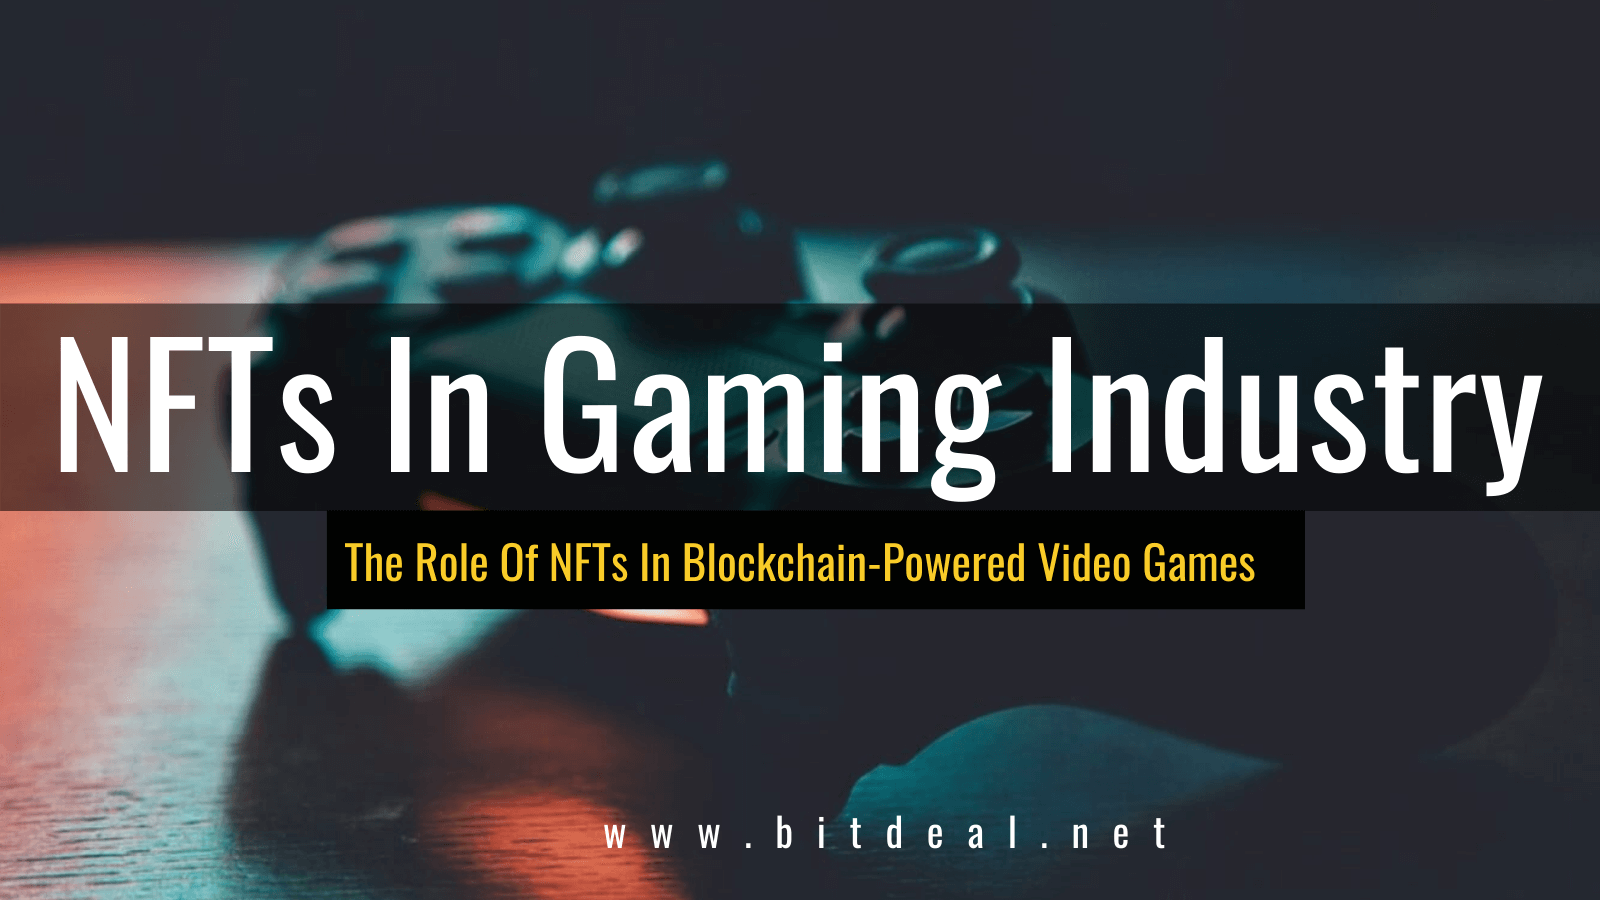 Article about How NFTs Change the Gaming Industry 